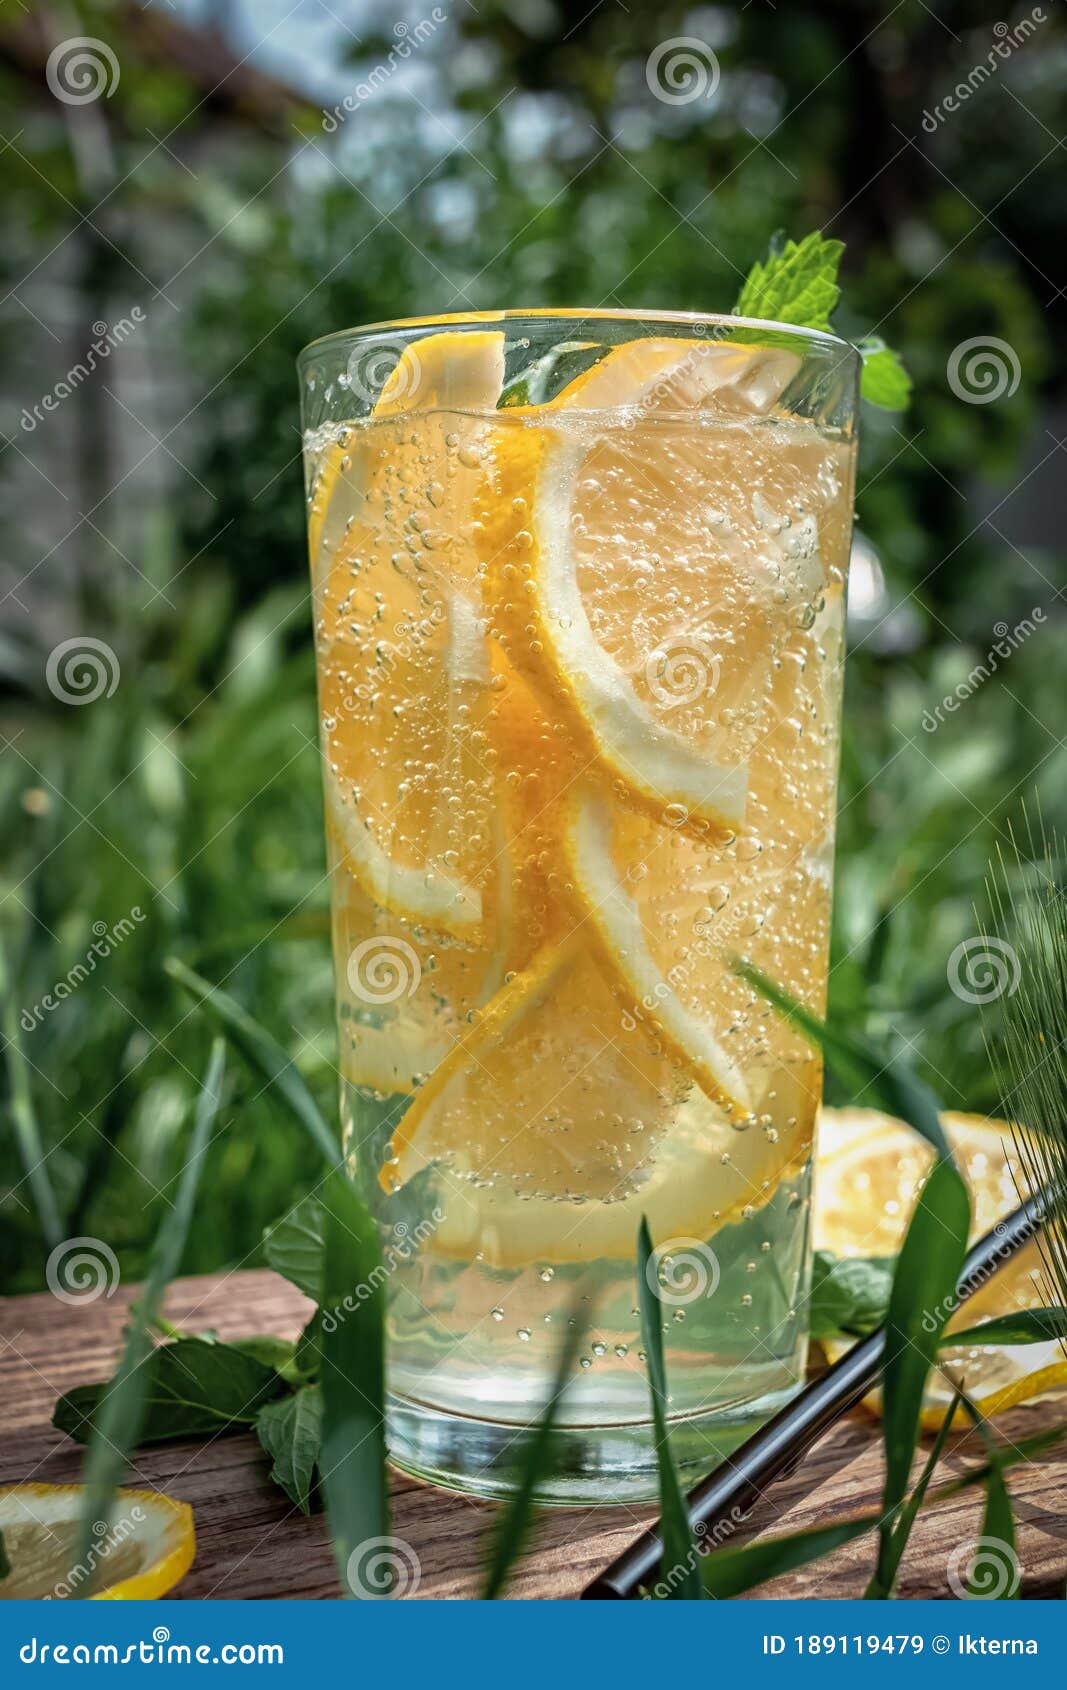 A Cool Refreshing Drink With Lemon On Nature On A Hot Day Stock Image Image Of Liquid Drink 